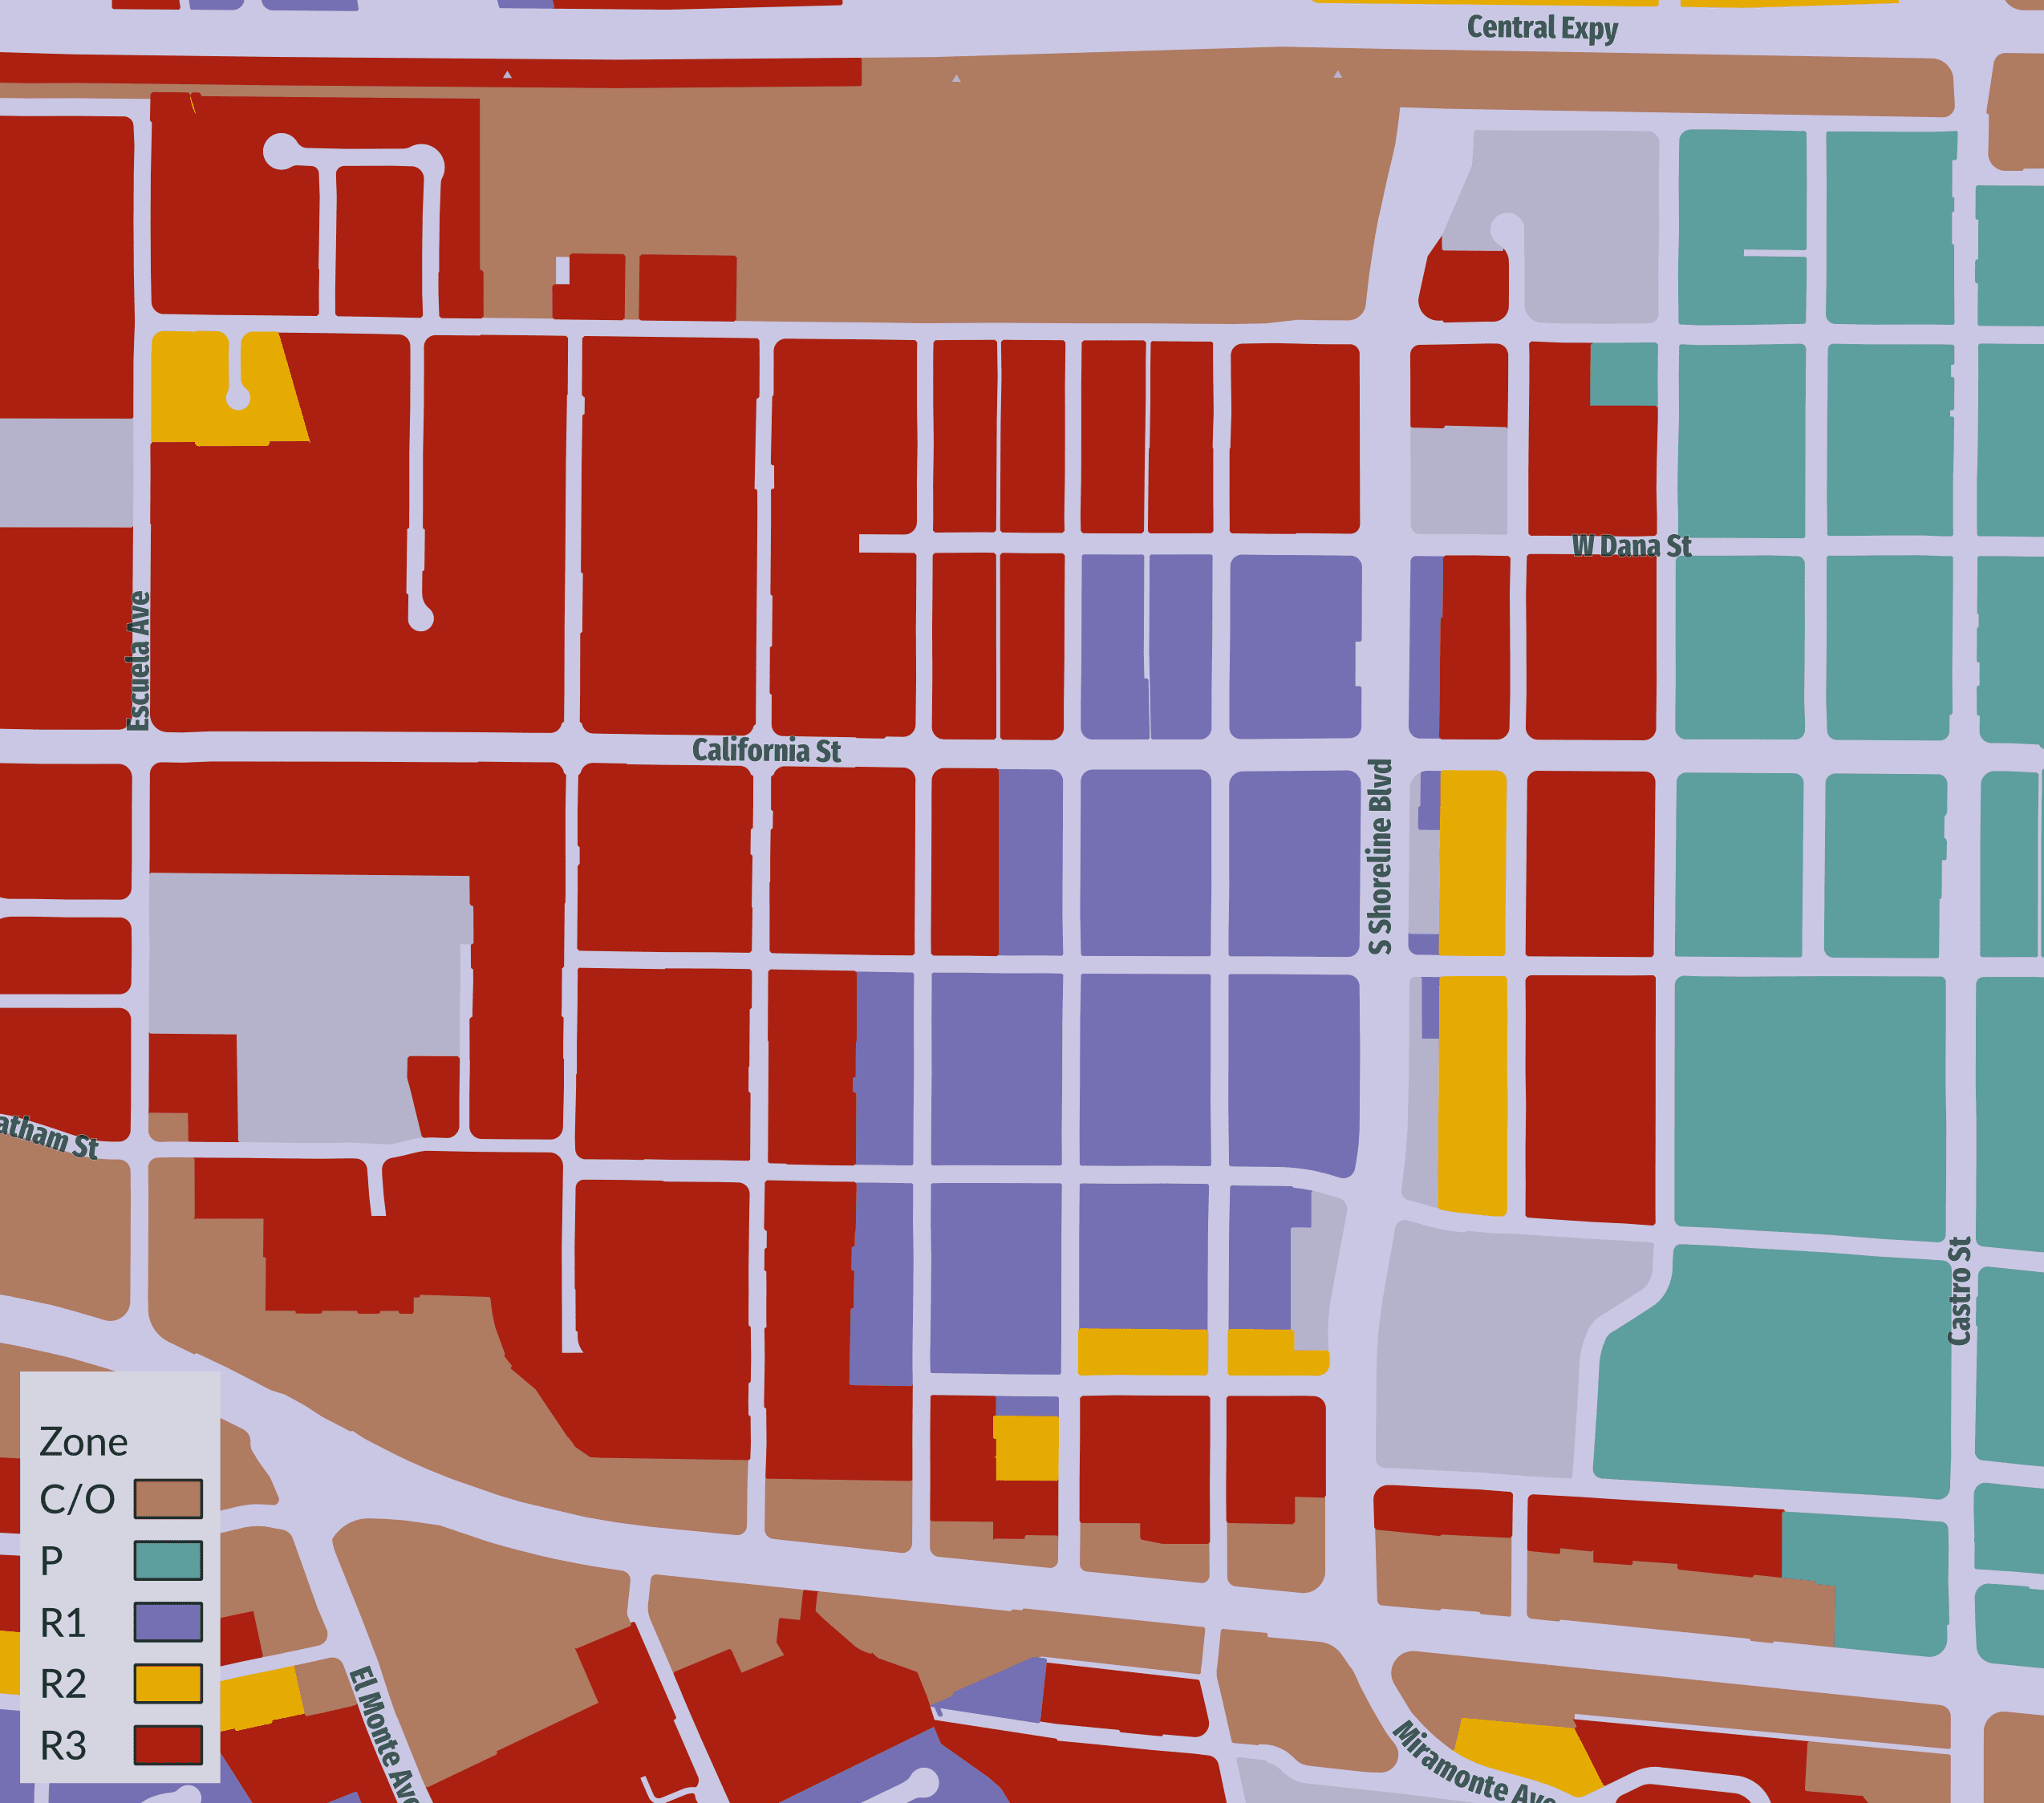 Reconstruction of the zoning map in 1978